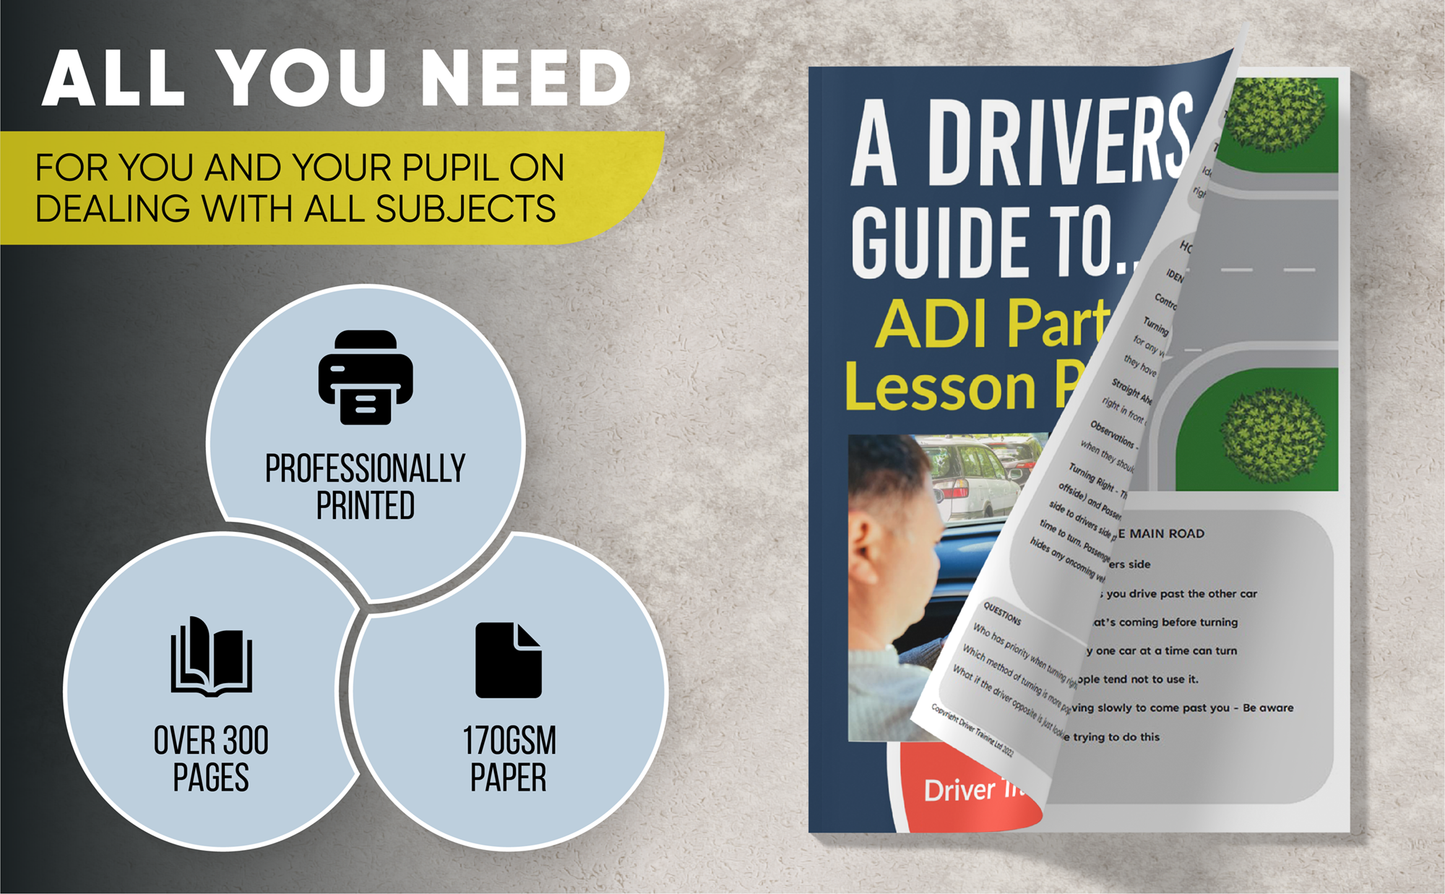 driving instructor books triple set for driving schools & driving instructors - Driver Training Ltd